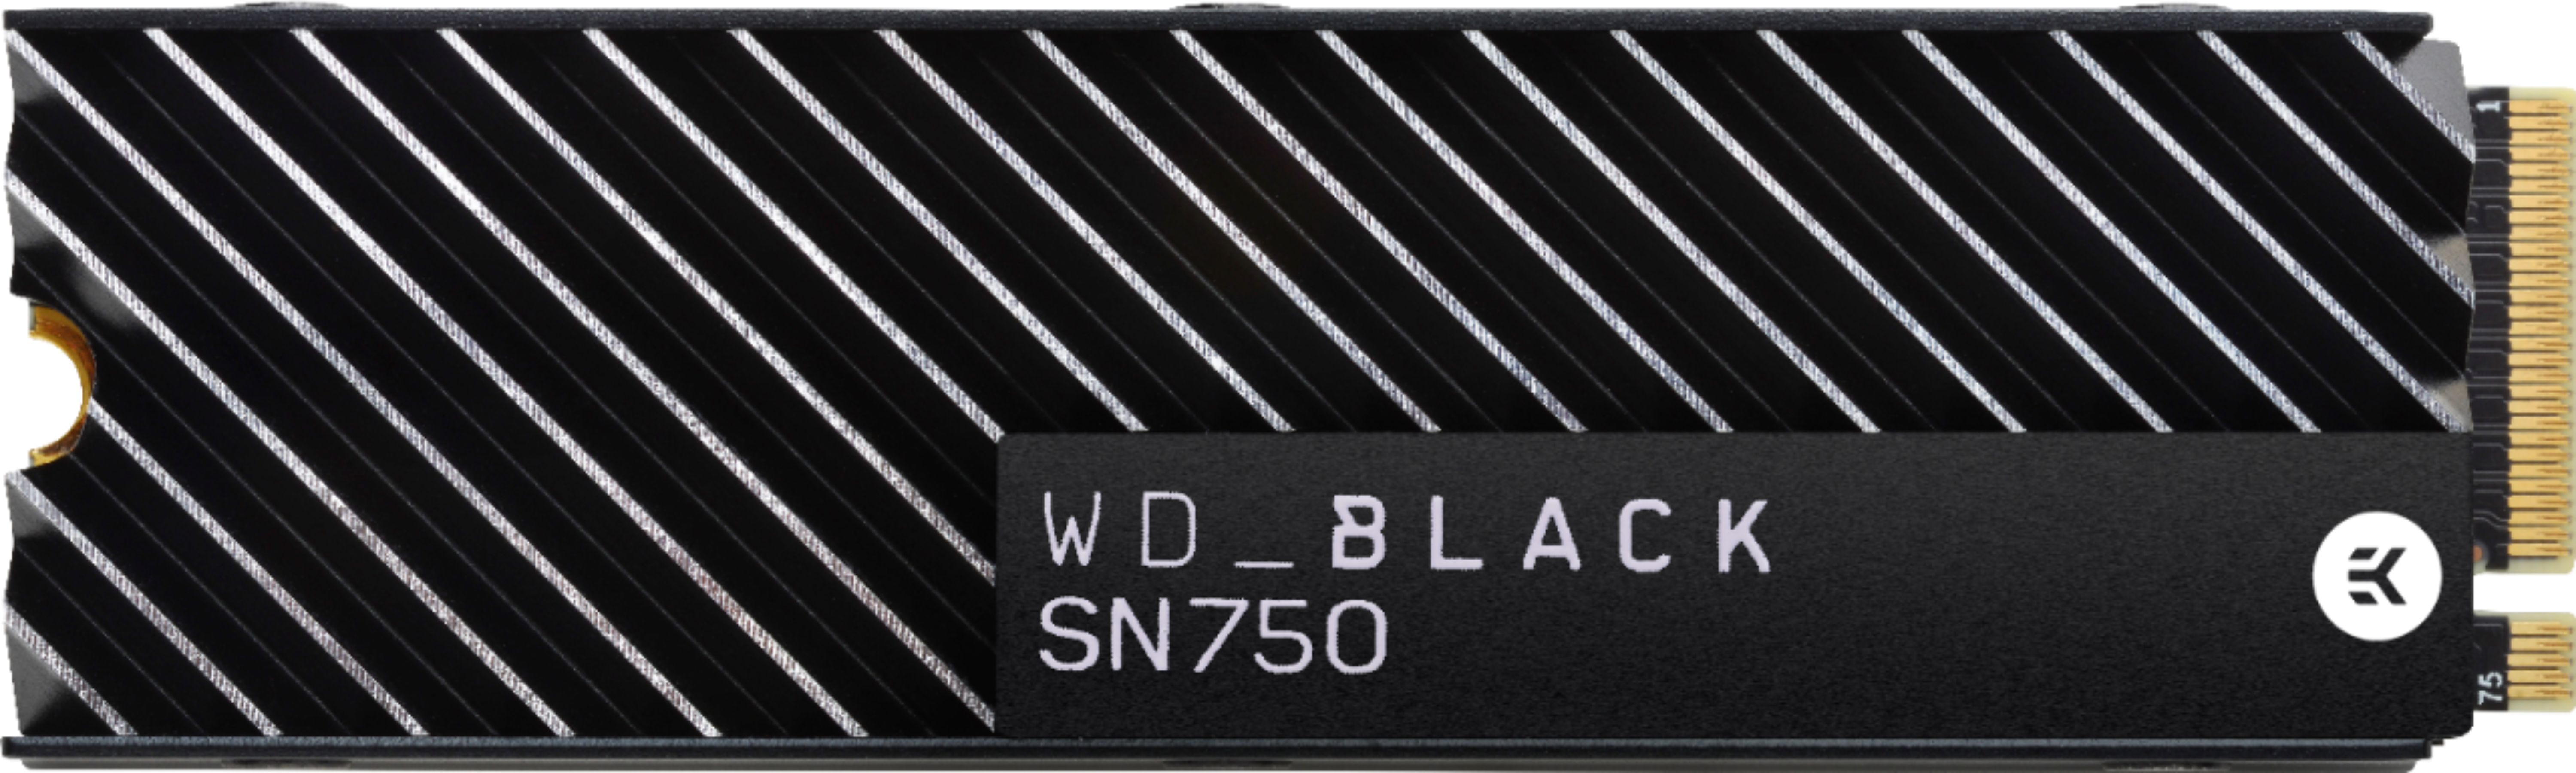 Wd Black Sn750 Nvme Ssd 500gb Internal Pci Express 3 0 X4 Nvme Solid State D For Sale Online Ebay